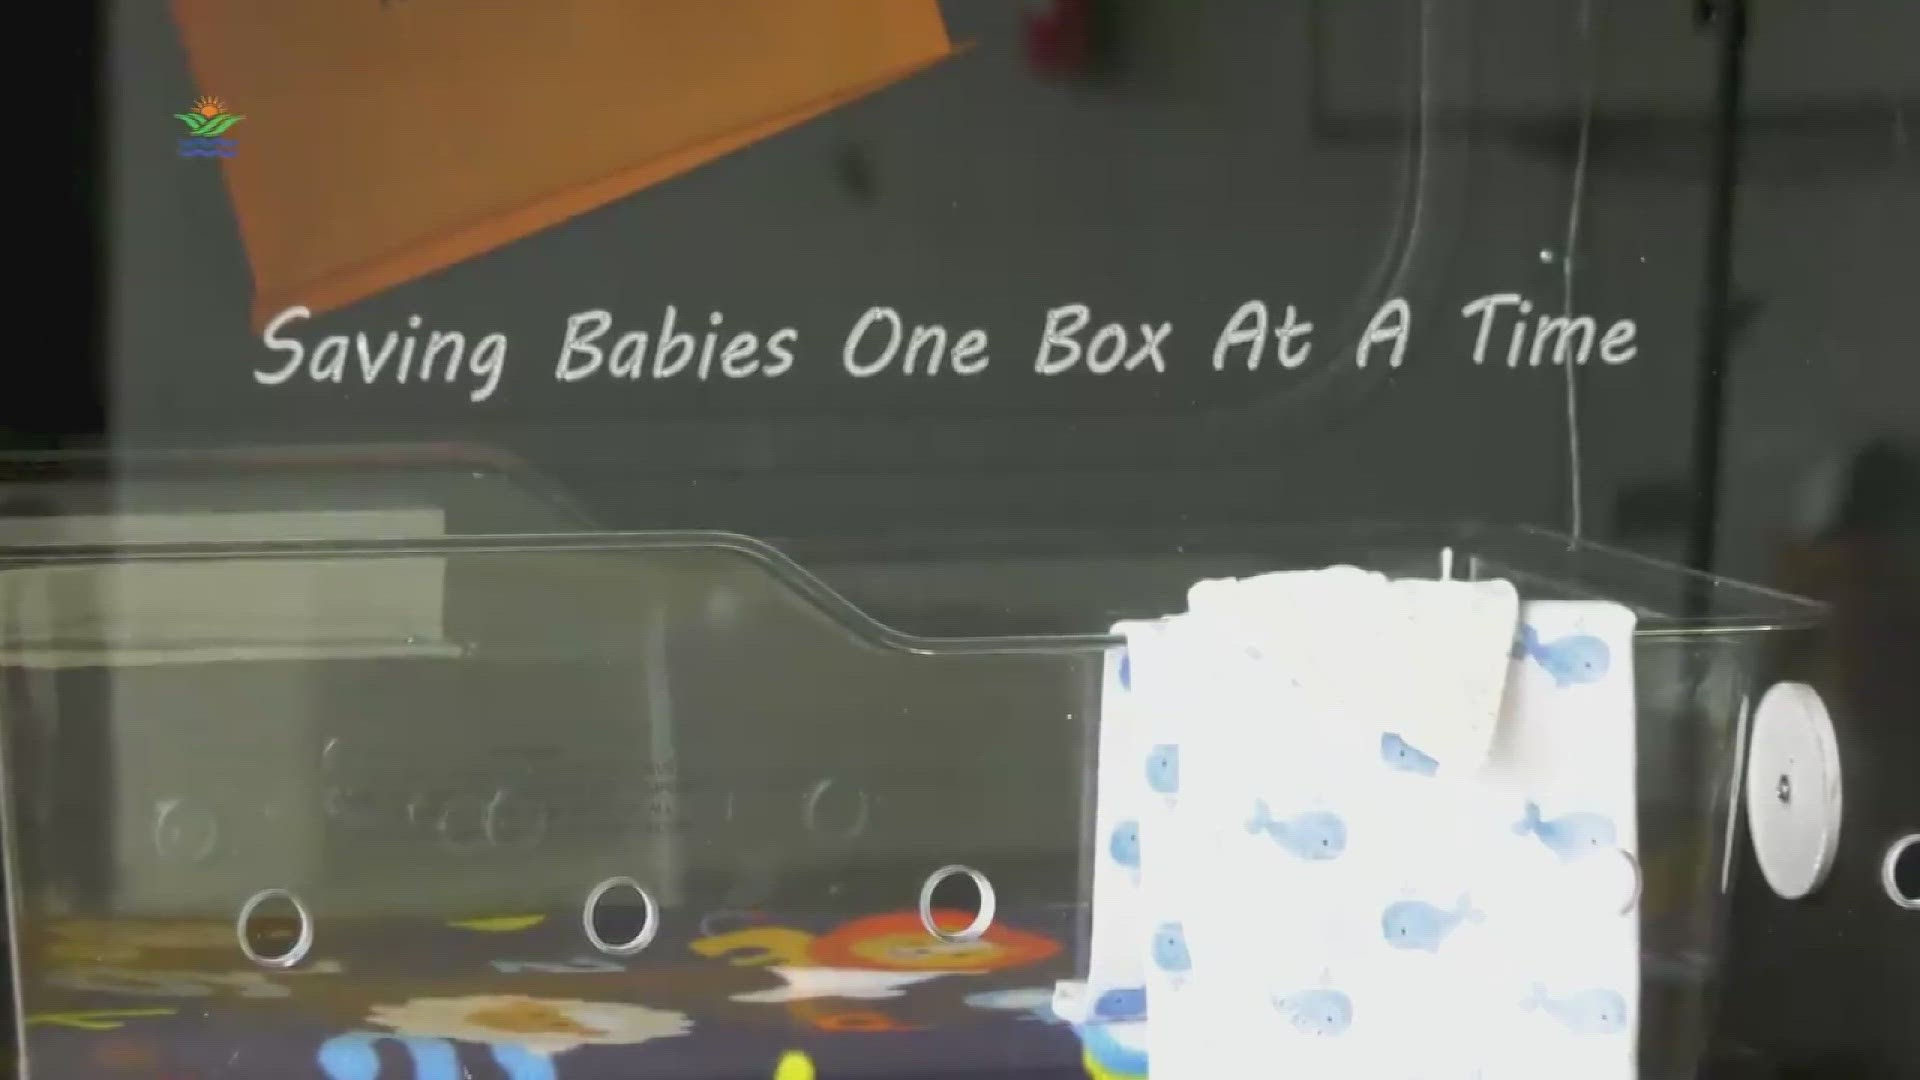 A newborn surrendered at a Knoxville Baby Box is home with his forever family.